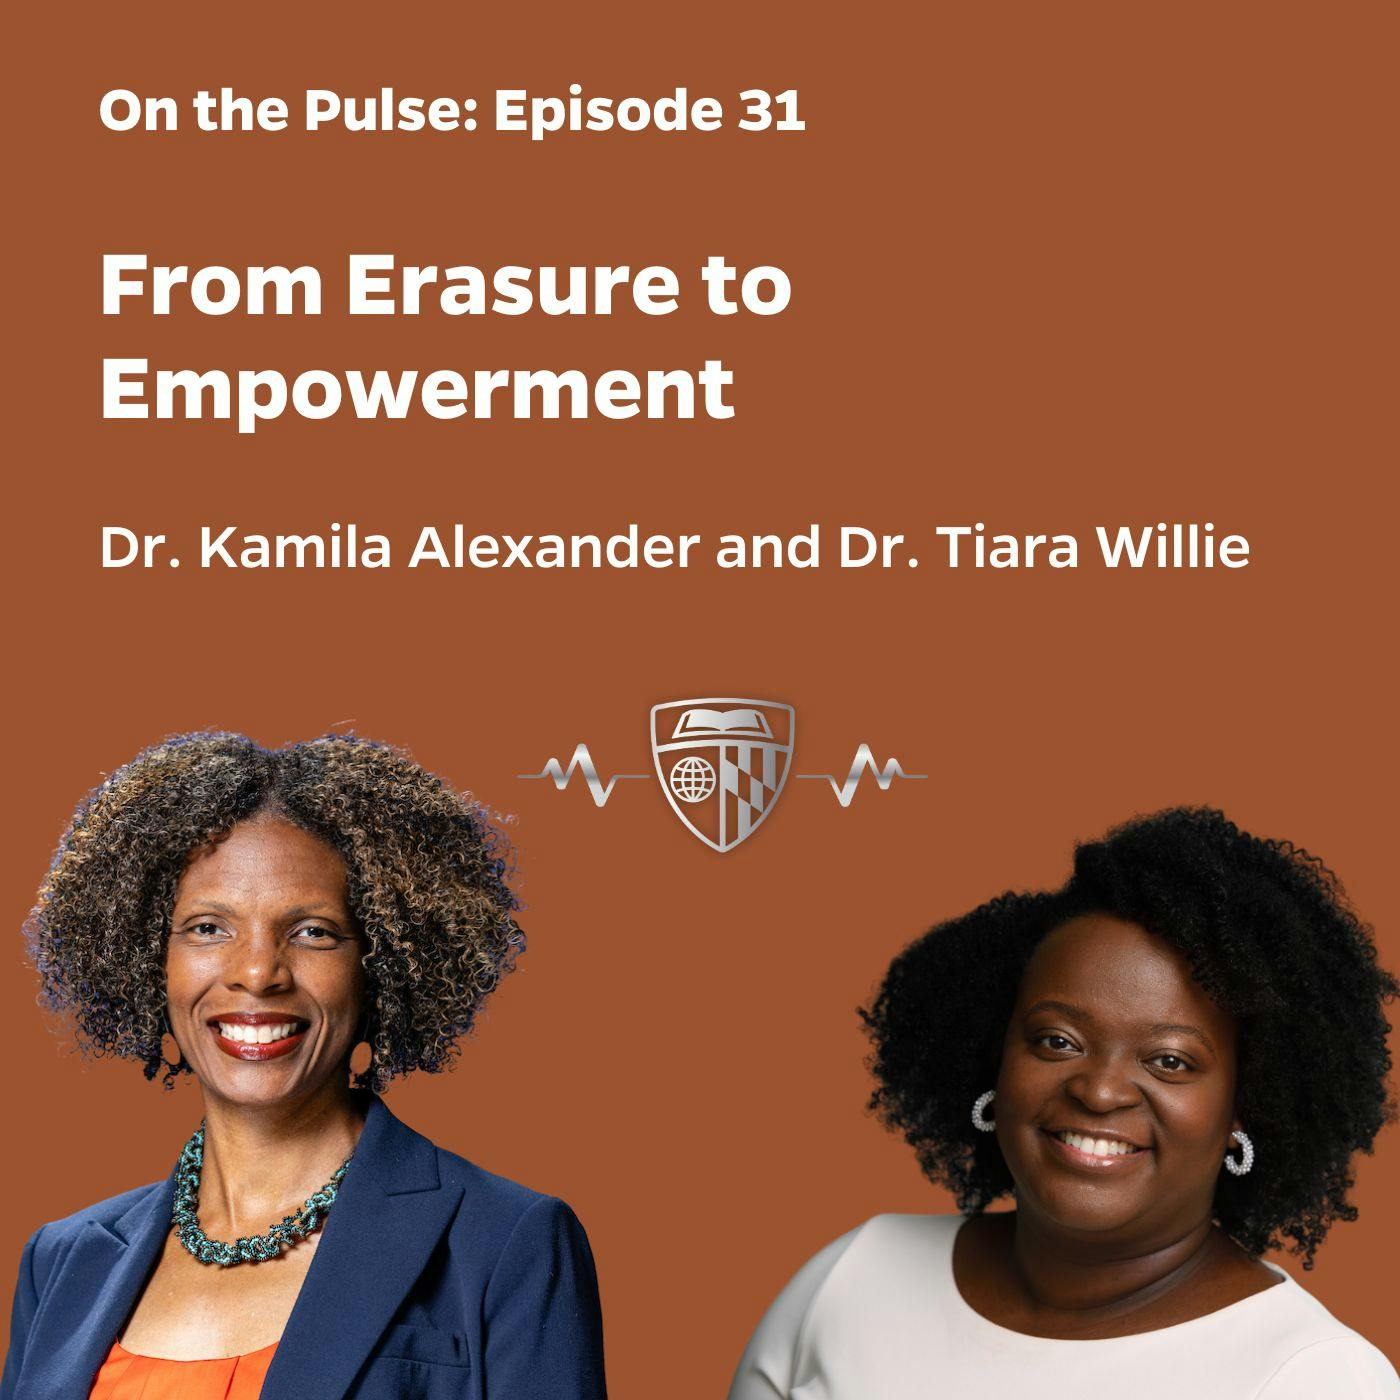 Episode 31: From Erasure to Empowerment